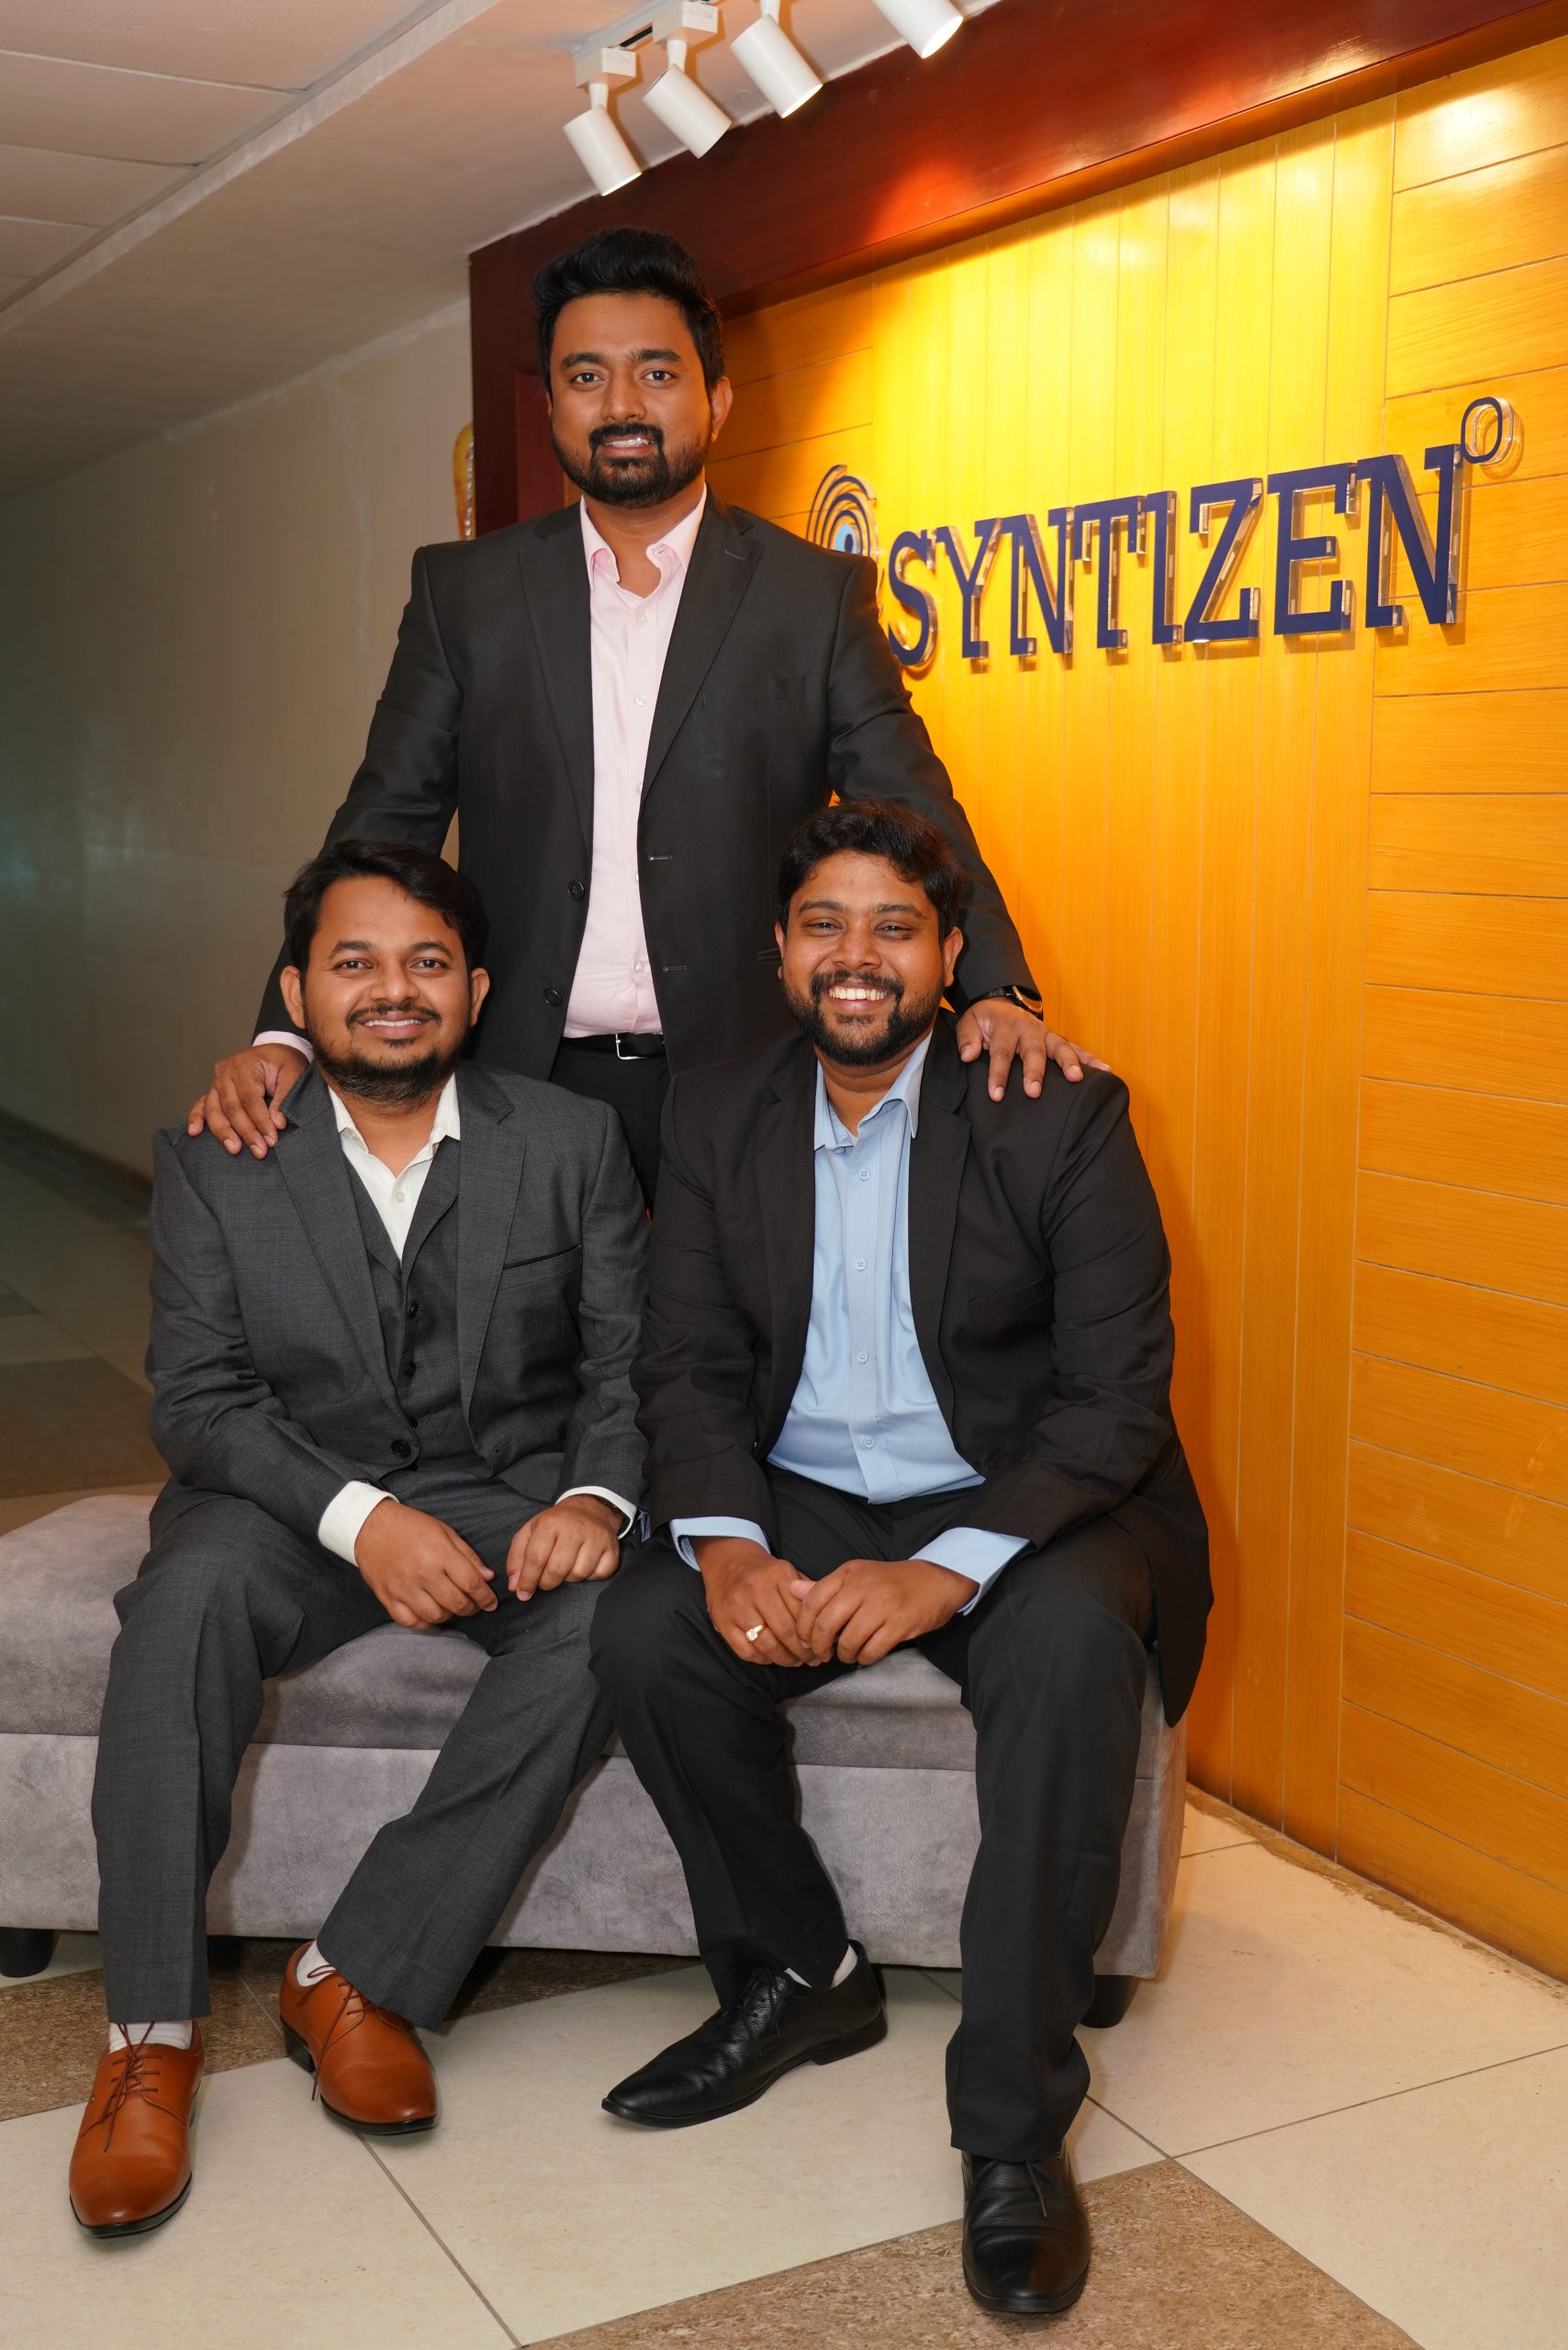 digital-identity-solution-provider-syntizen-technologies-pvt-limited-has-been-acquired-by-m2p